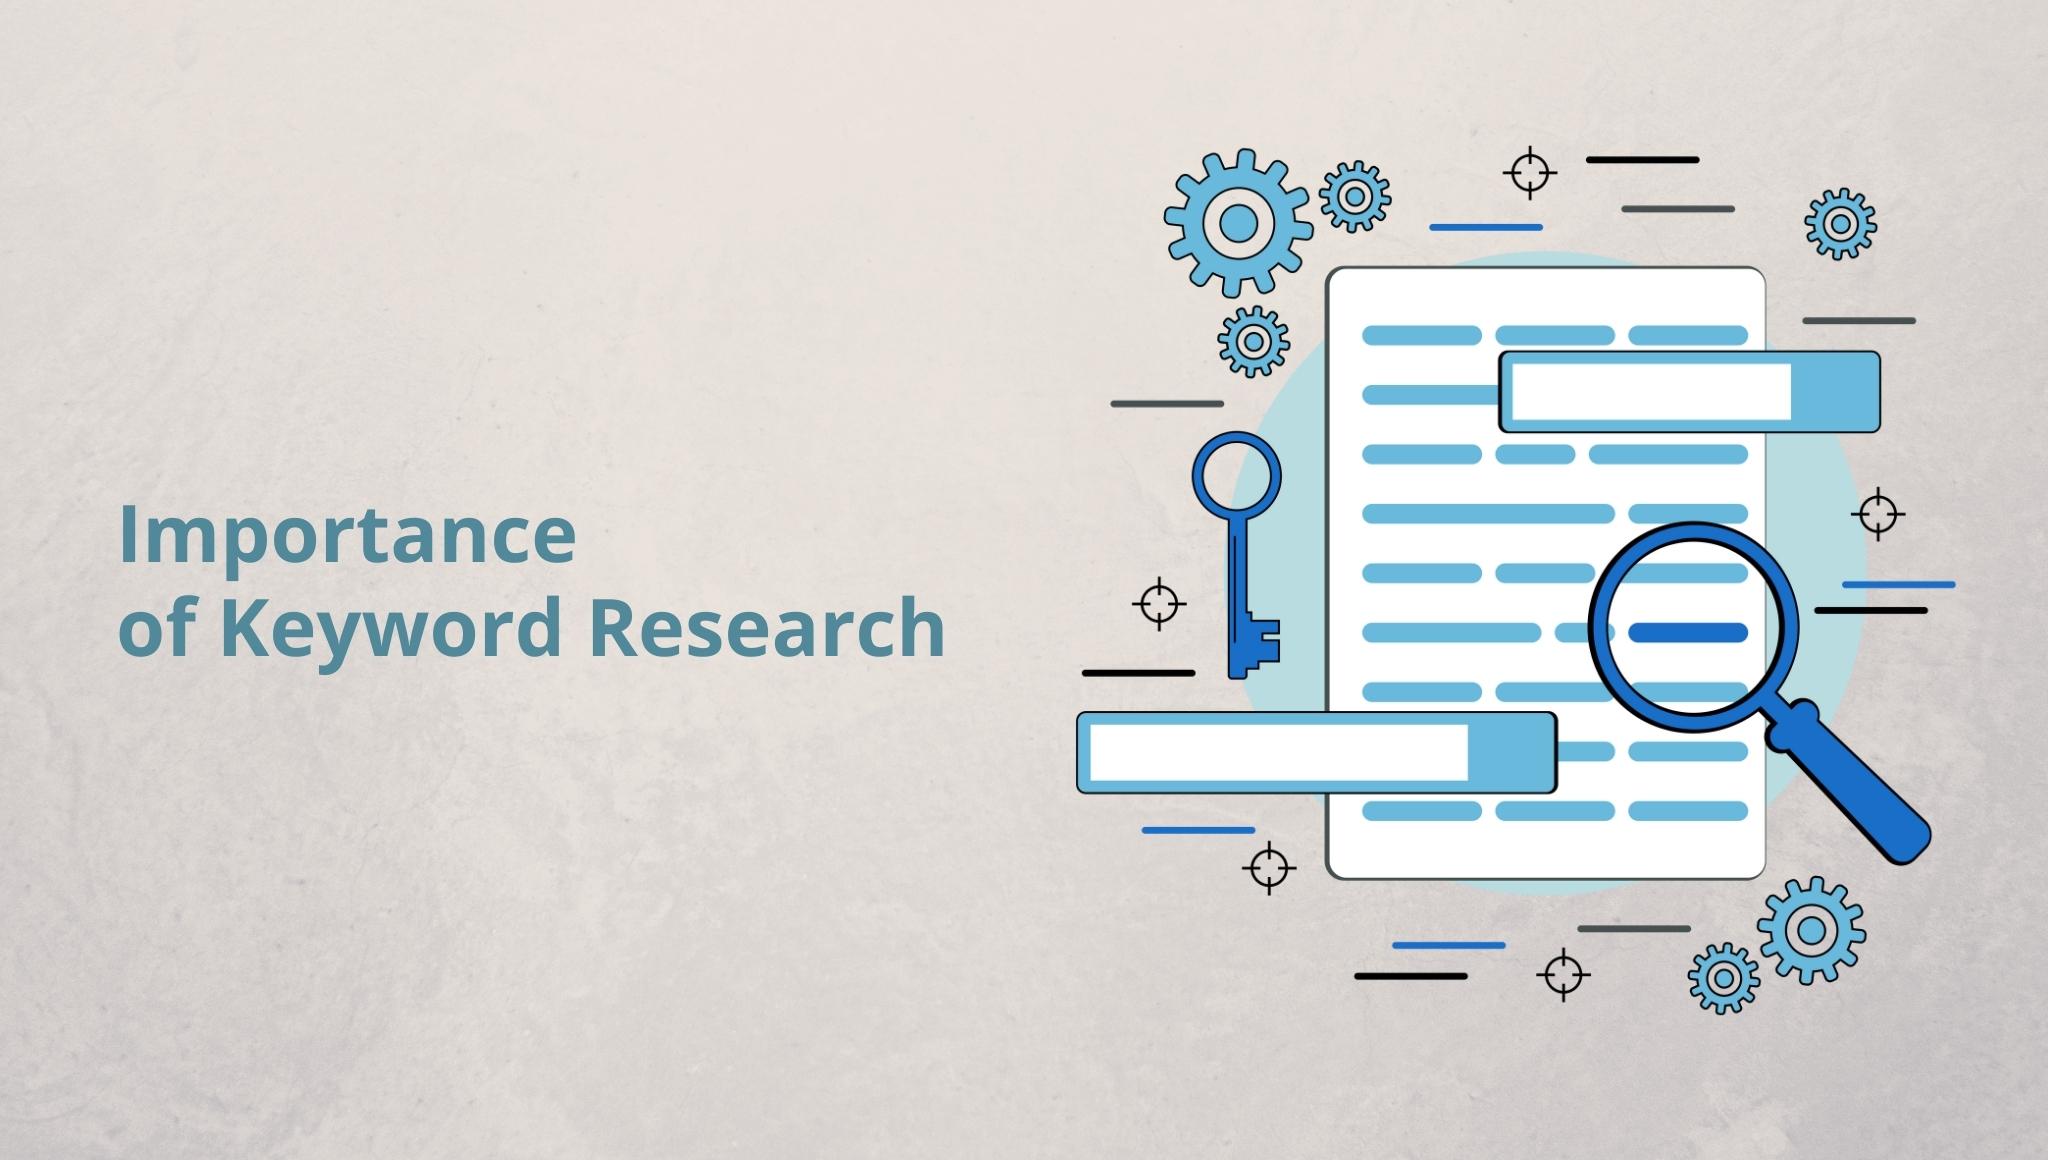  Importance of Keyword Research